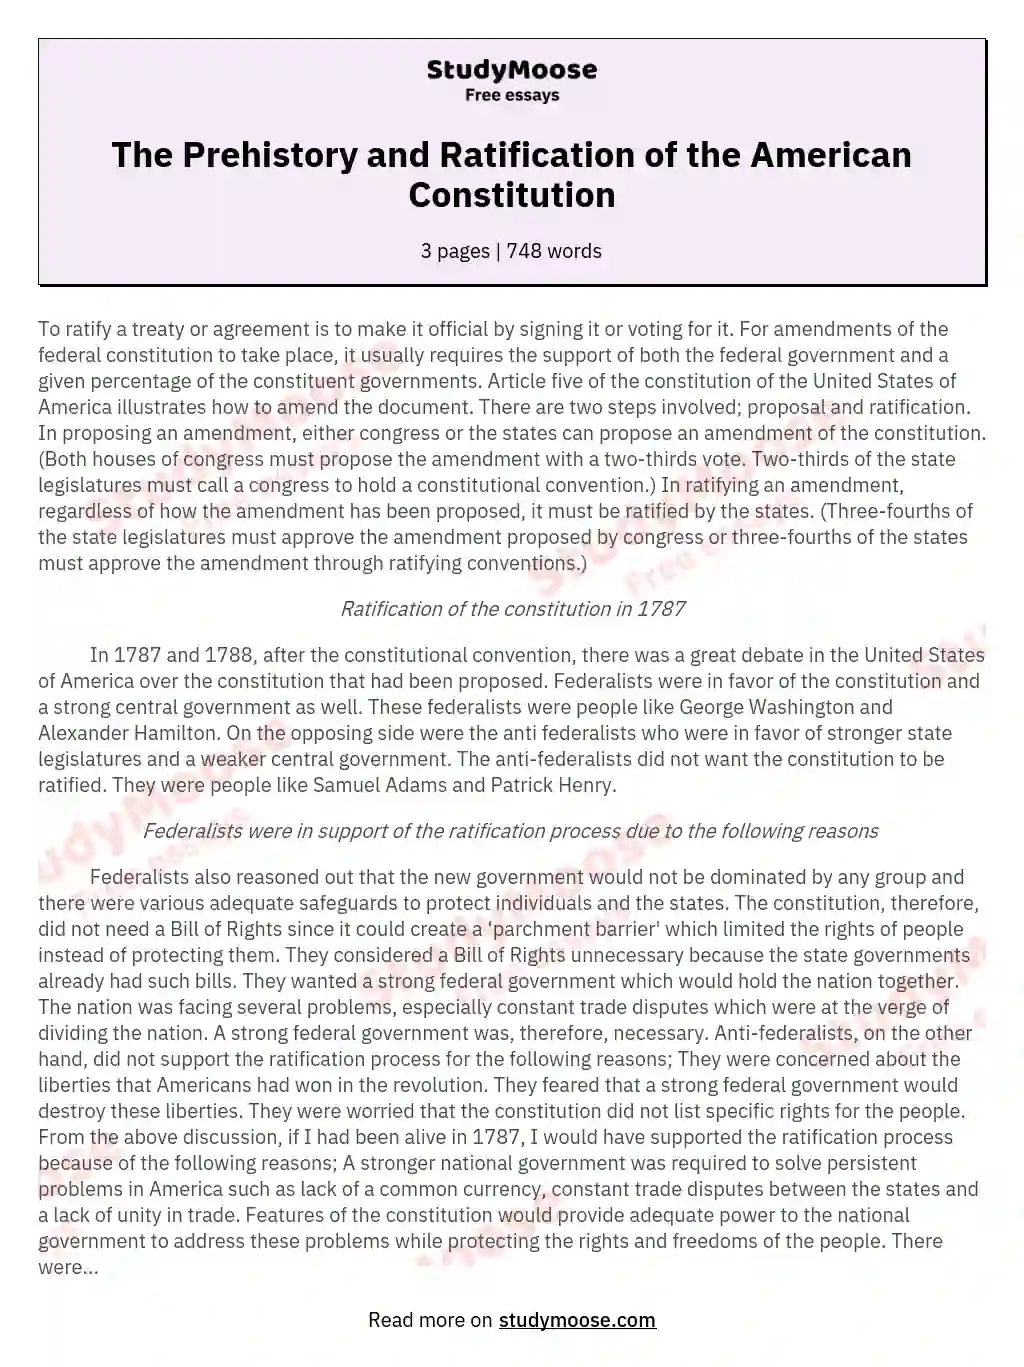 The Prehistory and Ratification of the American Constitution essay